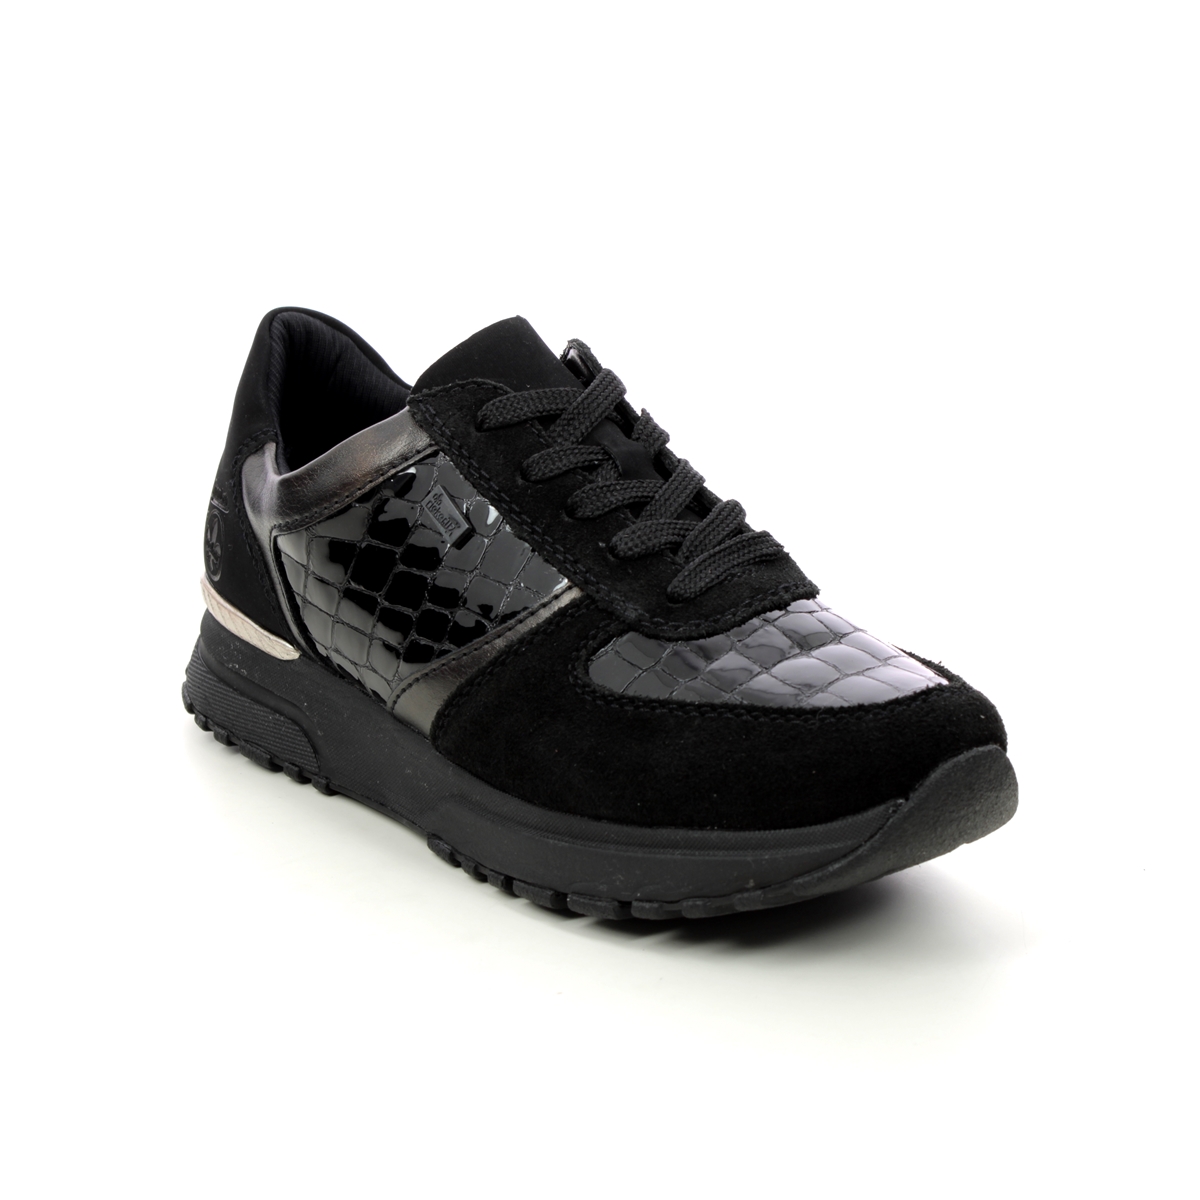 Rieker Govicroc Effect Black Patent Suede Womens Trainers N7412-00 In Size 36 In Plain Black Patent Suede